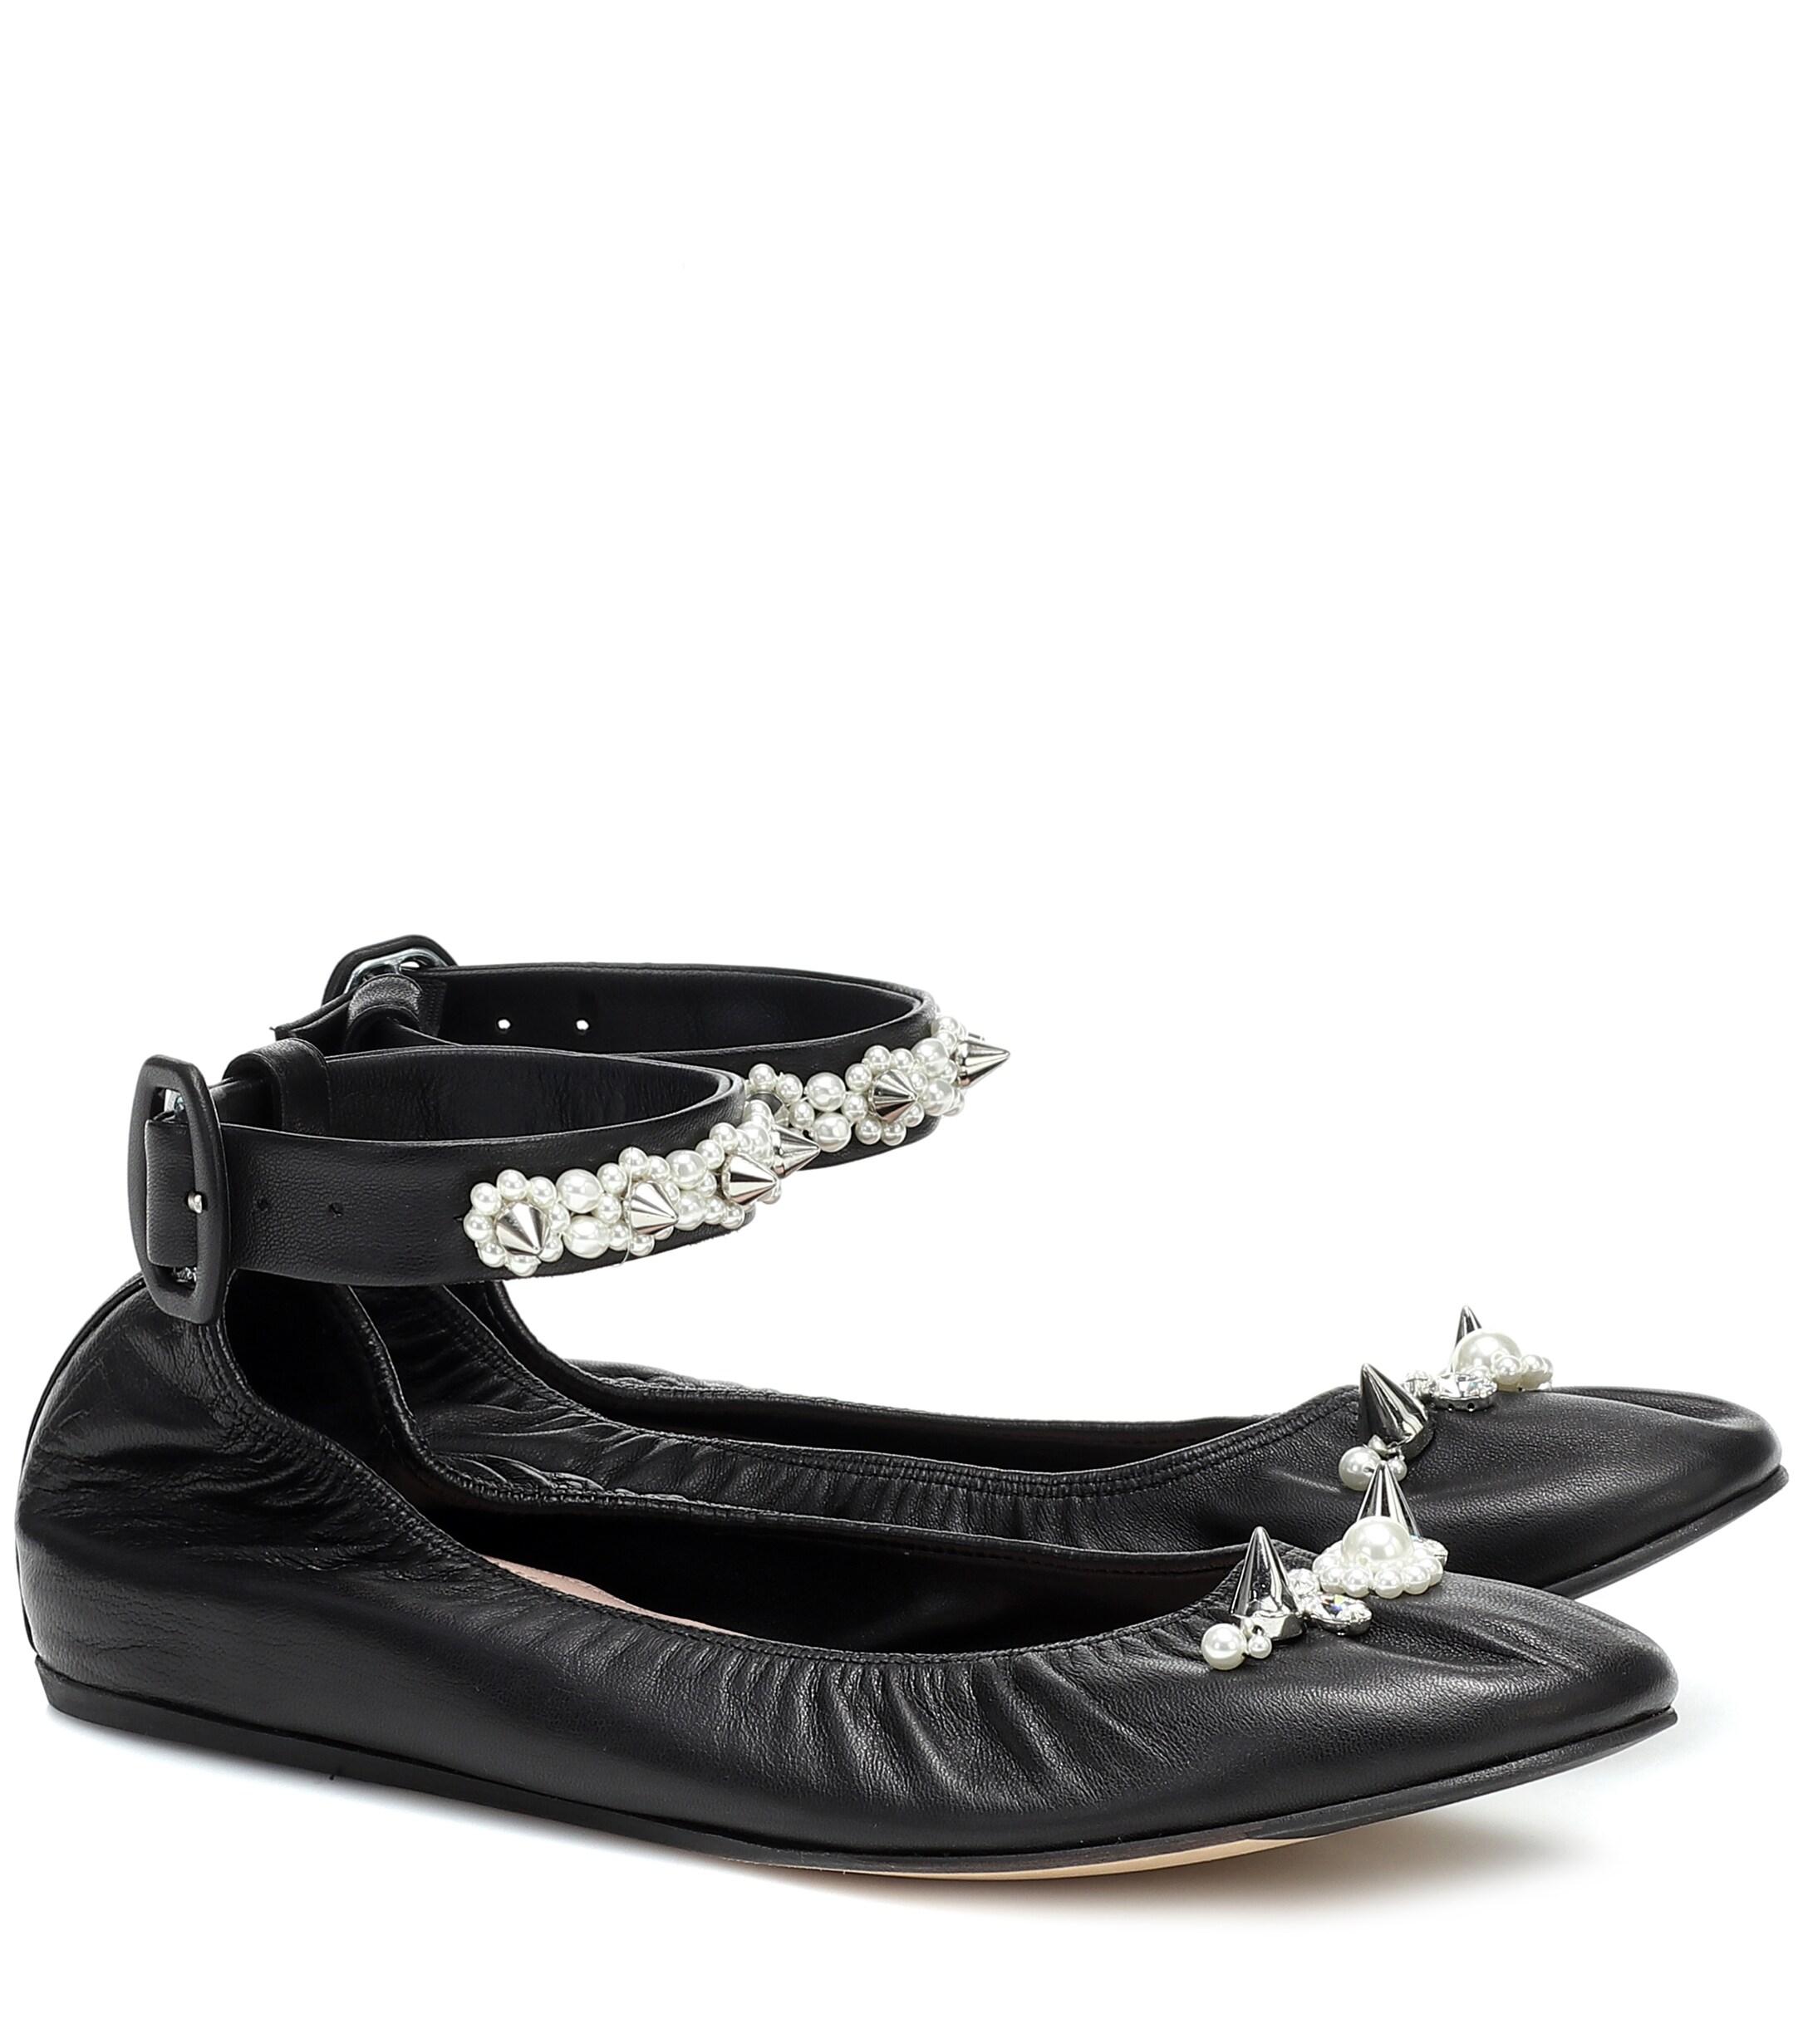 Simone Rocha Embellished Leather Ballet Flats in Black - Lyst